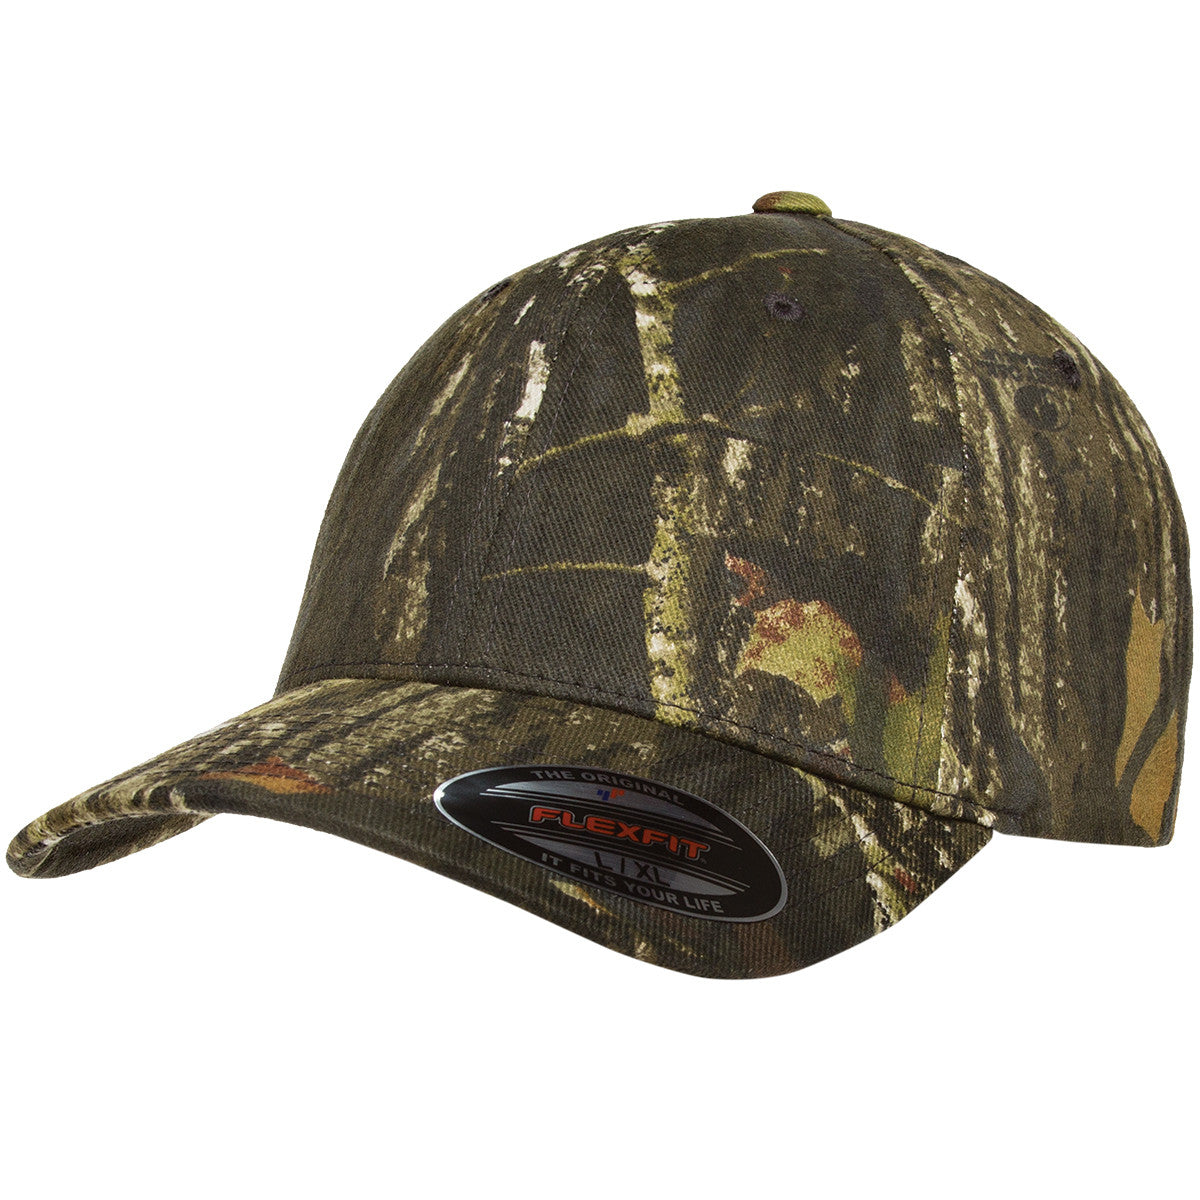 FLEXFIT Mossy Oak Infinity Camo Hats NEW Fitted Camouflage Cap S